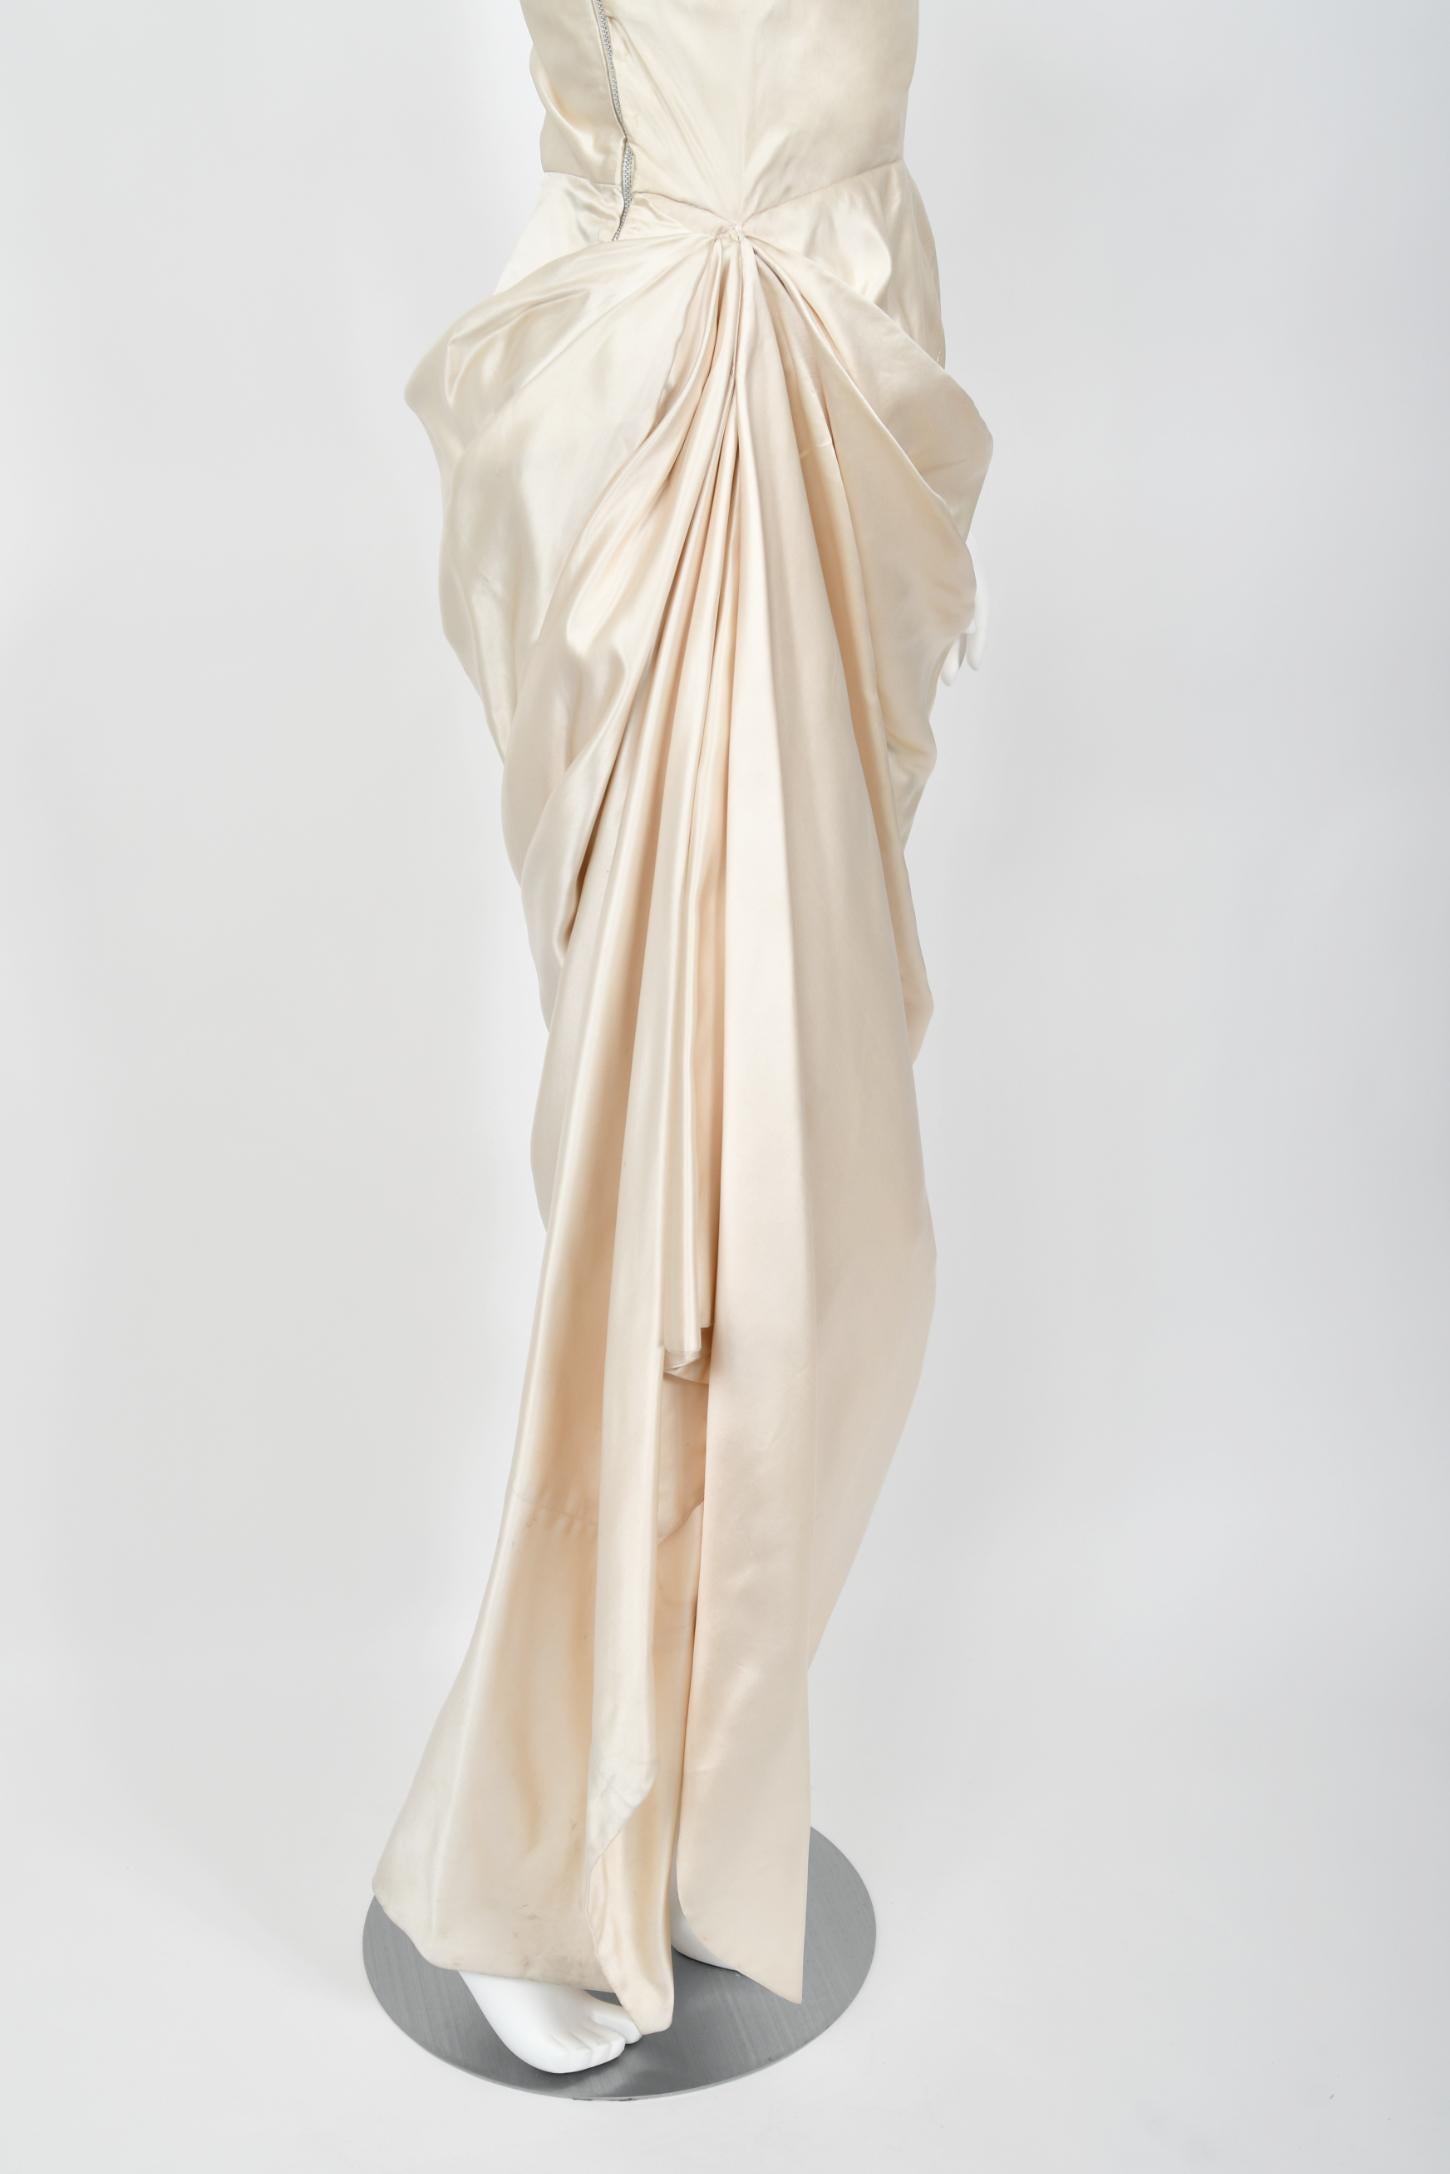 1949 Jeanne Lanvin Haute Couture Ivory Silk Satin Strapless Draped Bridal Gown  For Sale 4